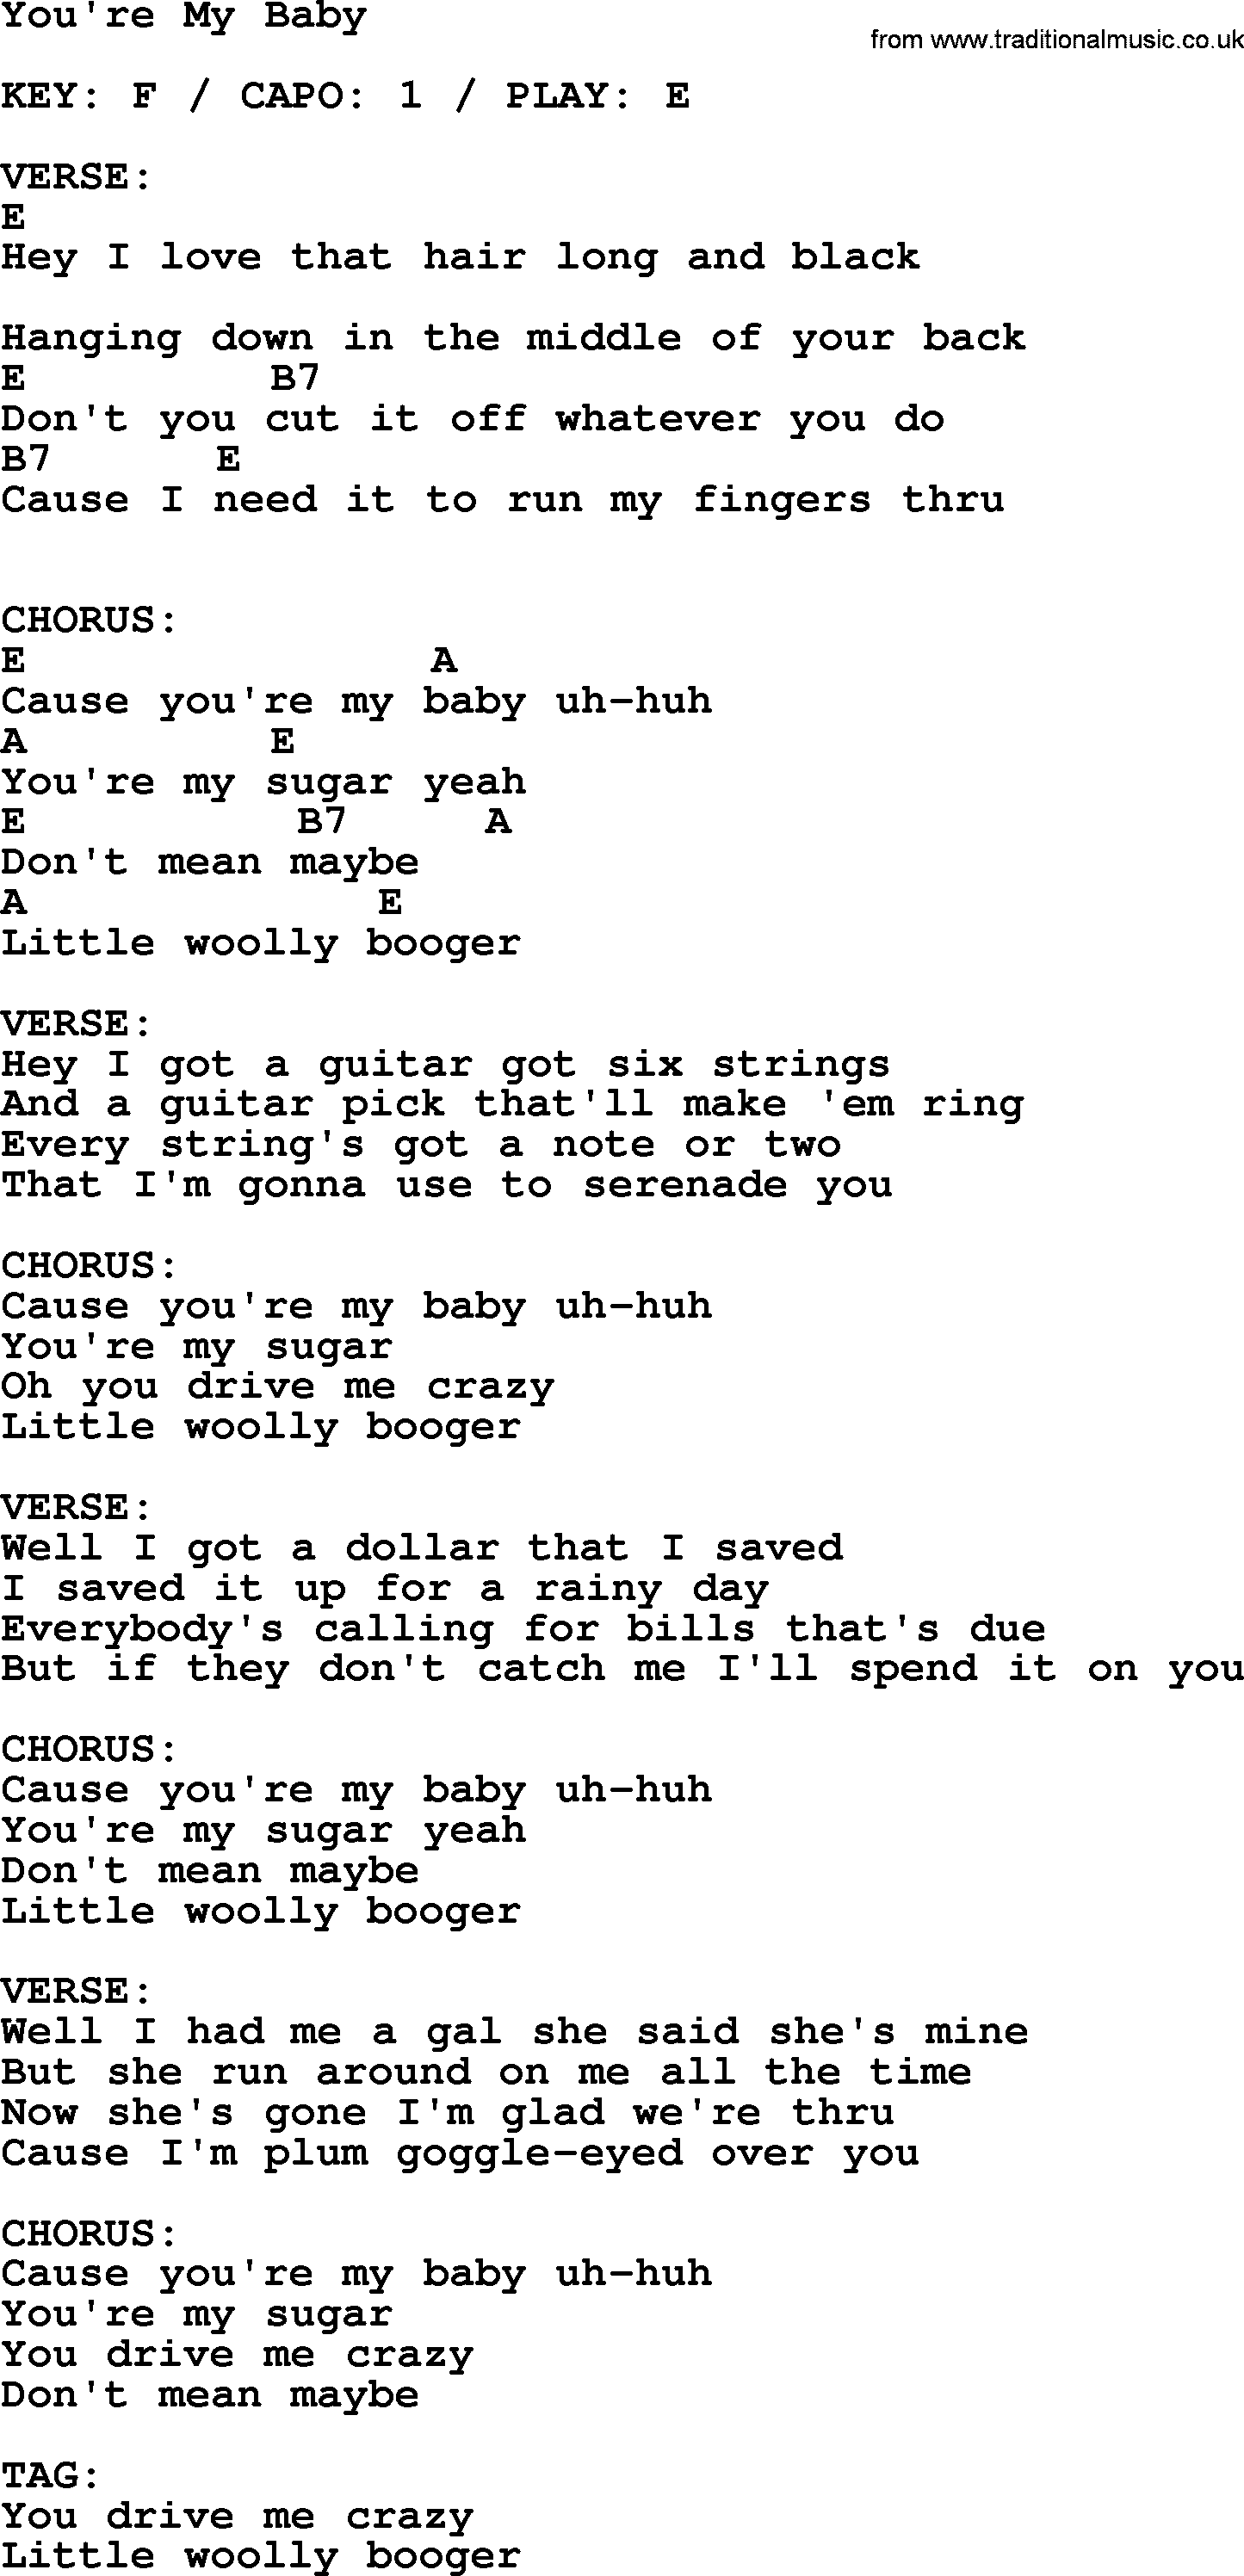 Johnny Cash song You're My Baby, lyrics and chords